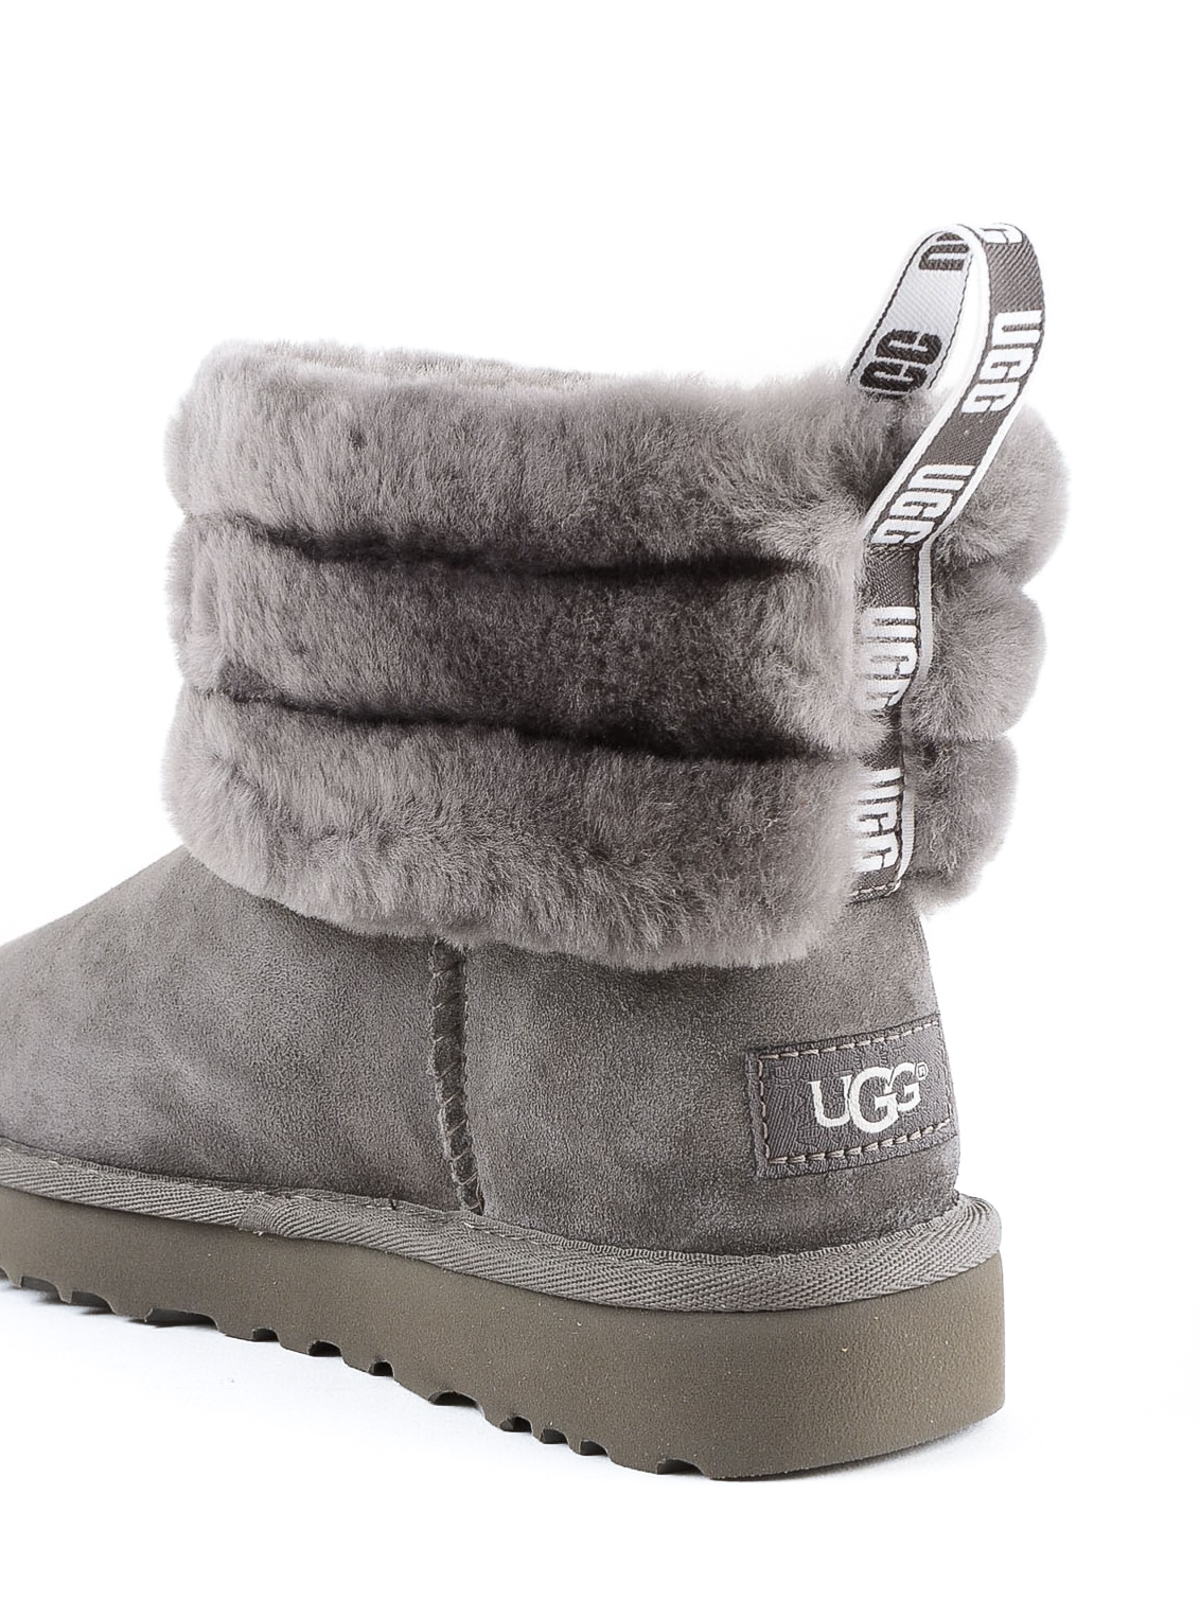 ugg fluff mini quilted boot in grey